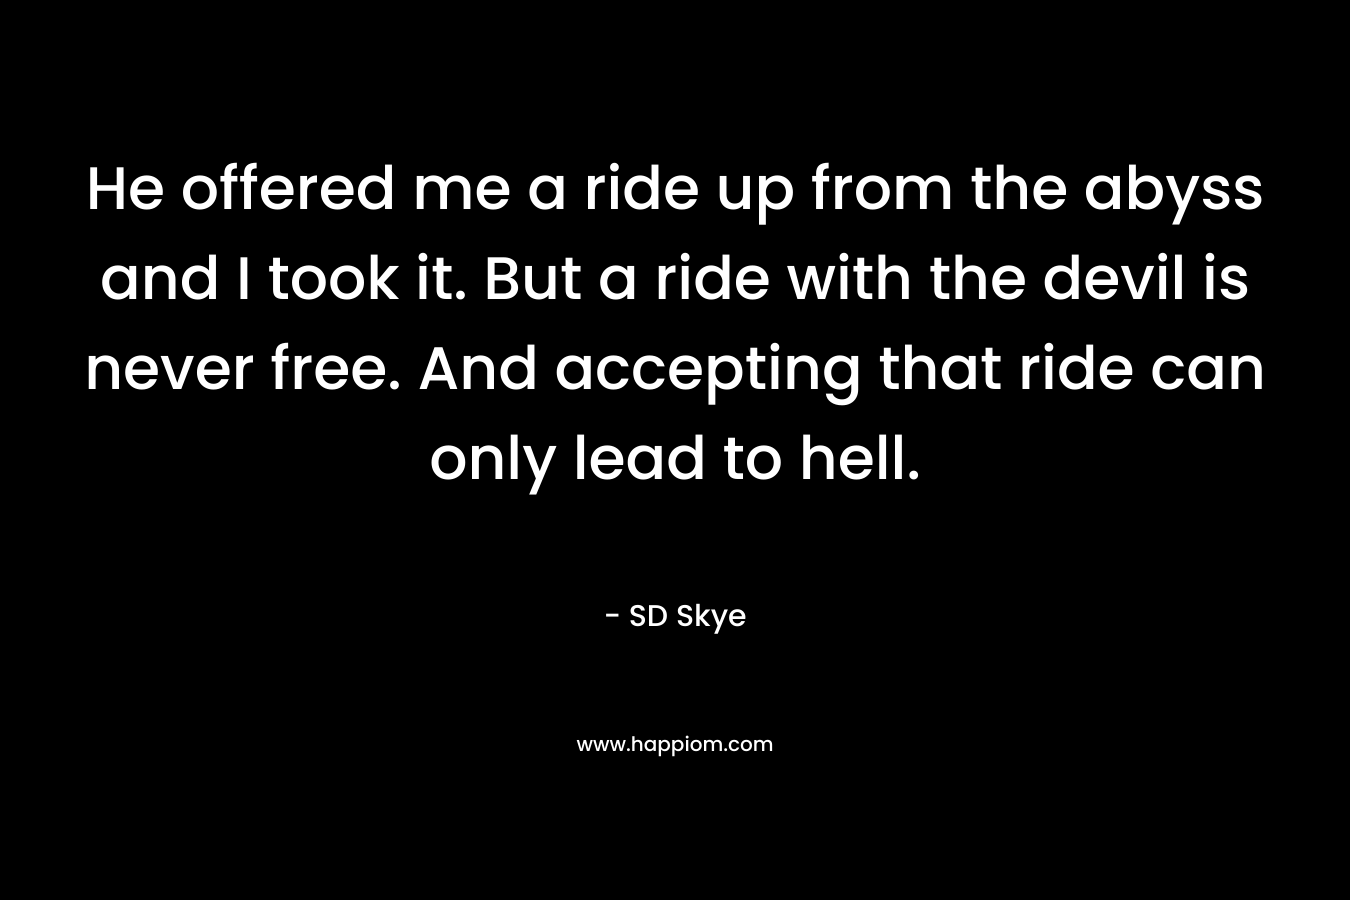 He offered me a ride up from the abyss and I took it. But a ride with the devil is never free. And accepting that ride can only lead to hell.